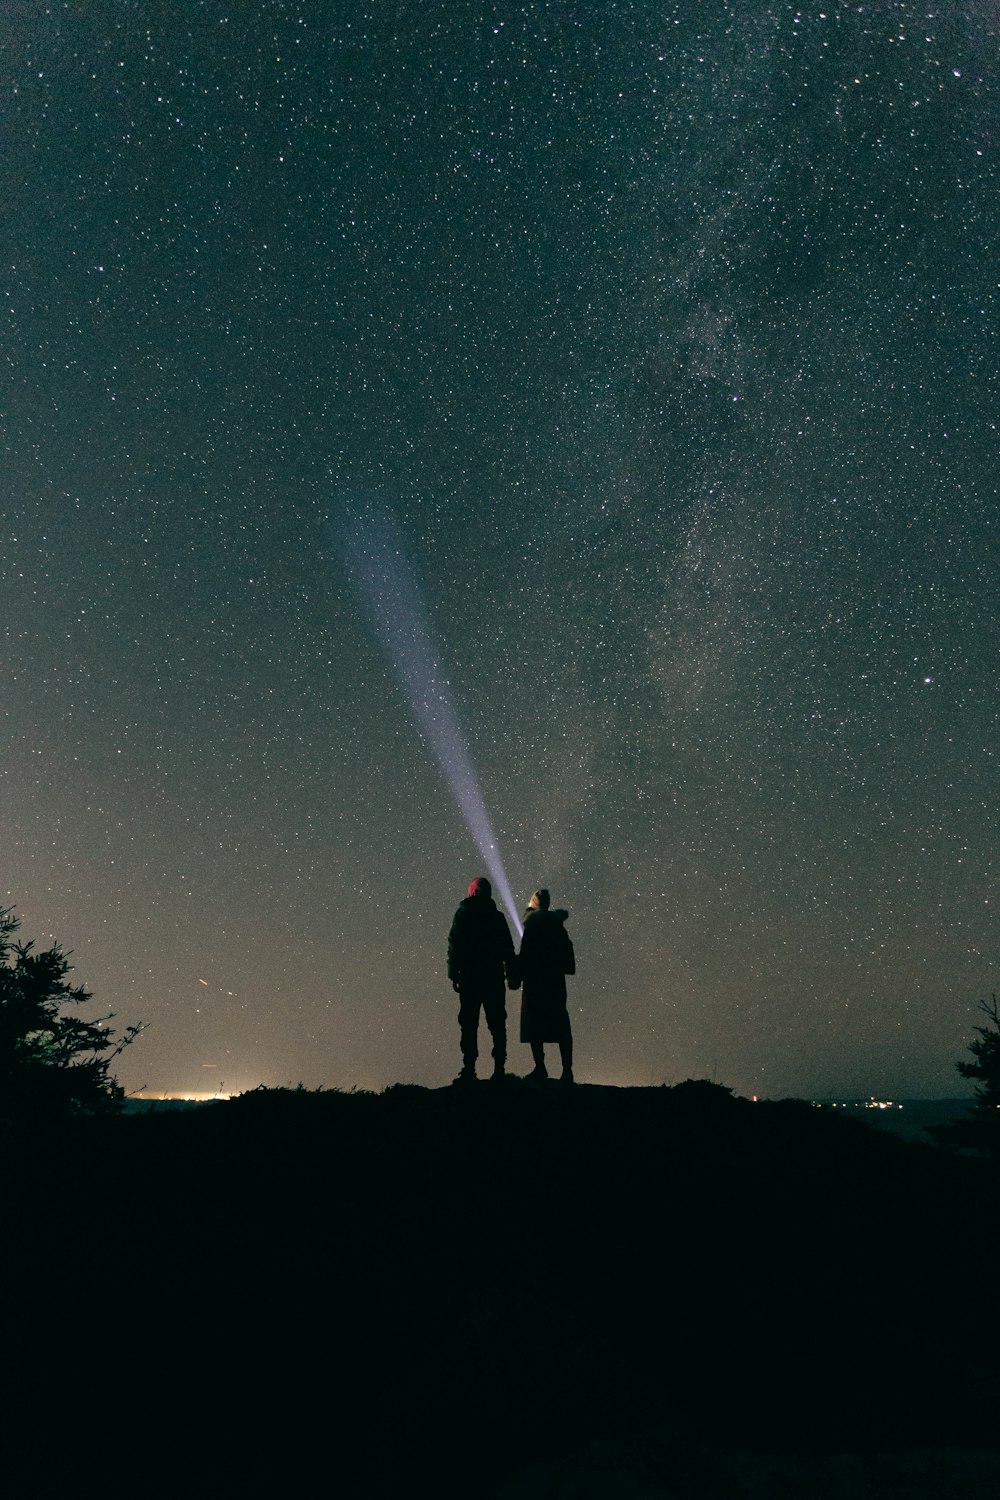 two people standing on top of a hill under a night sky